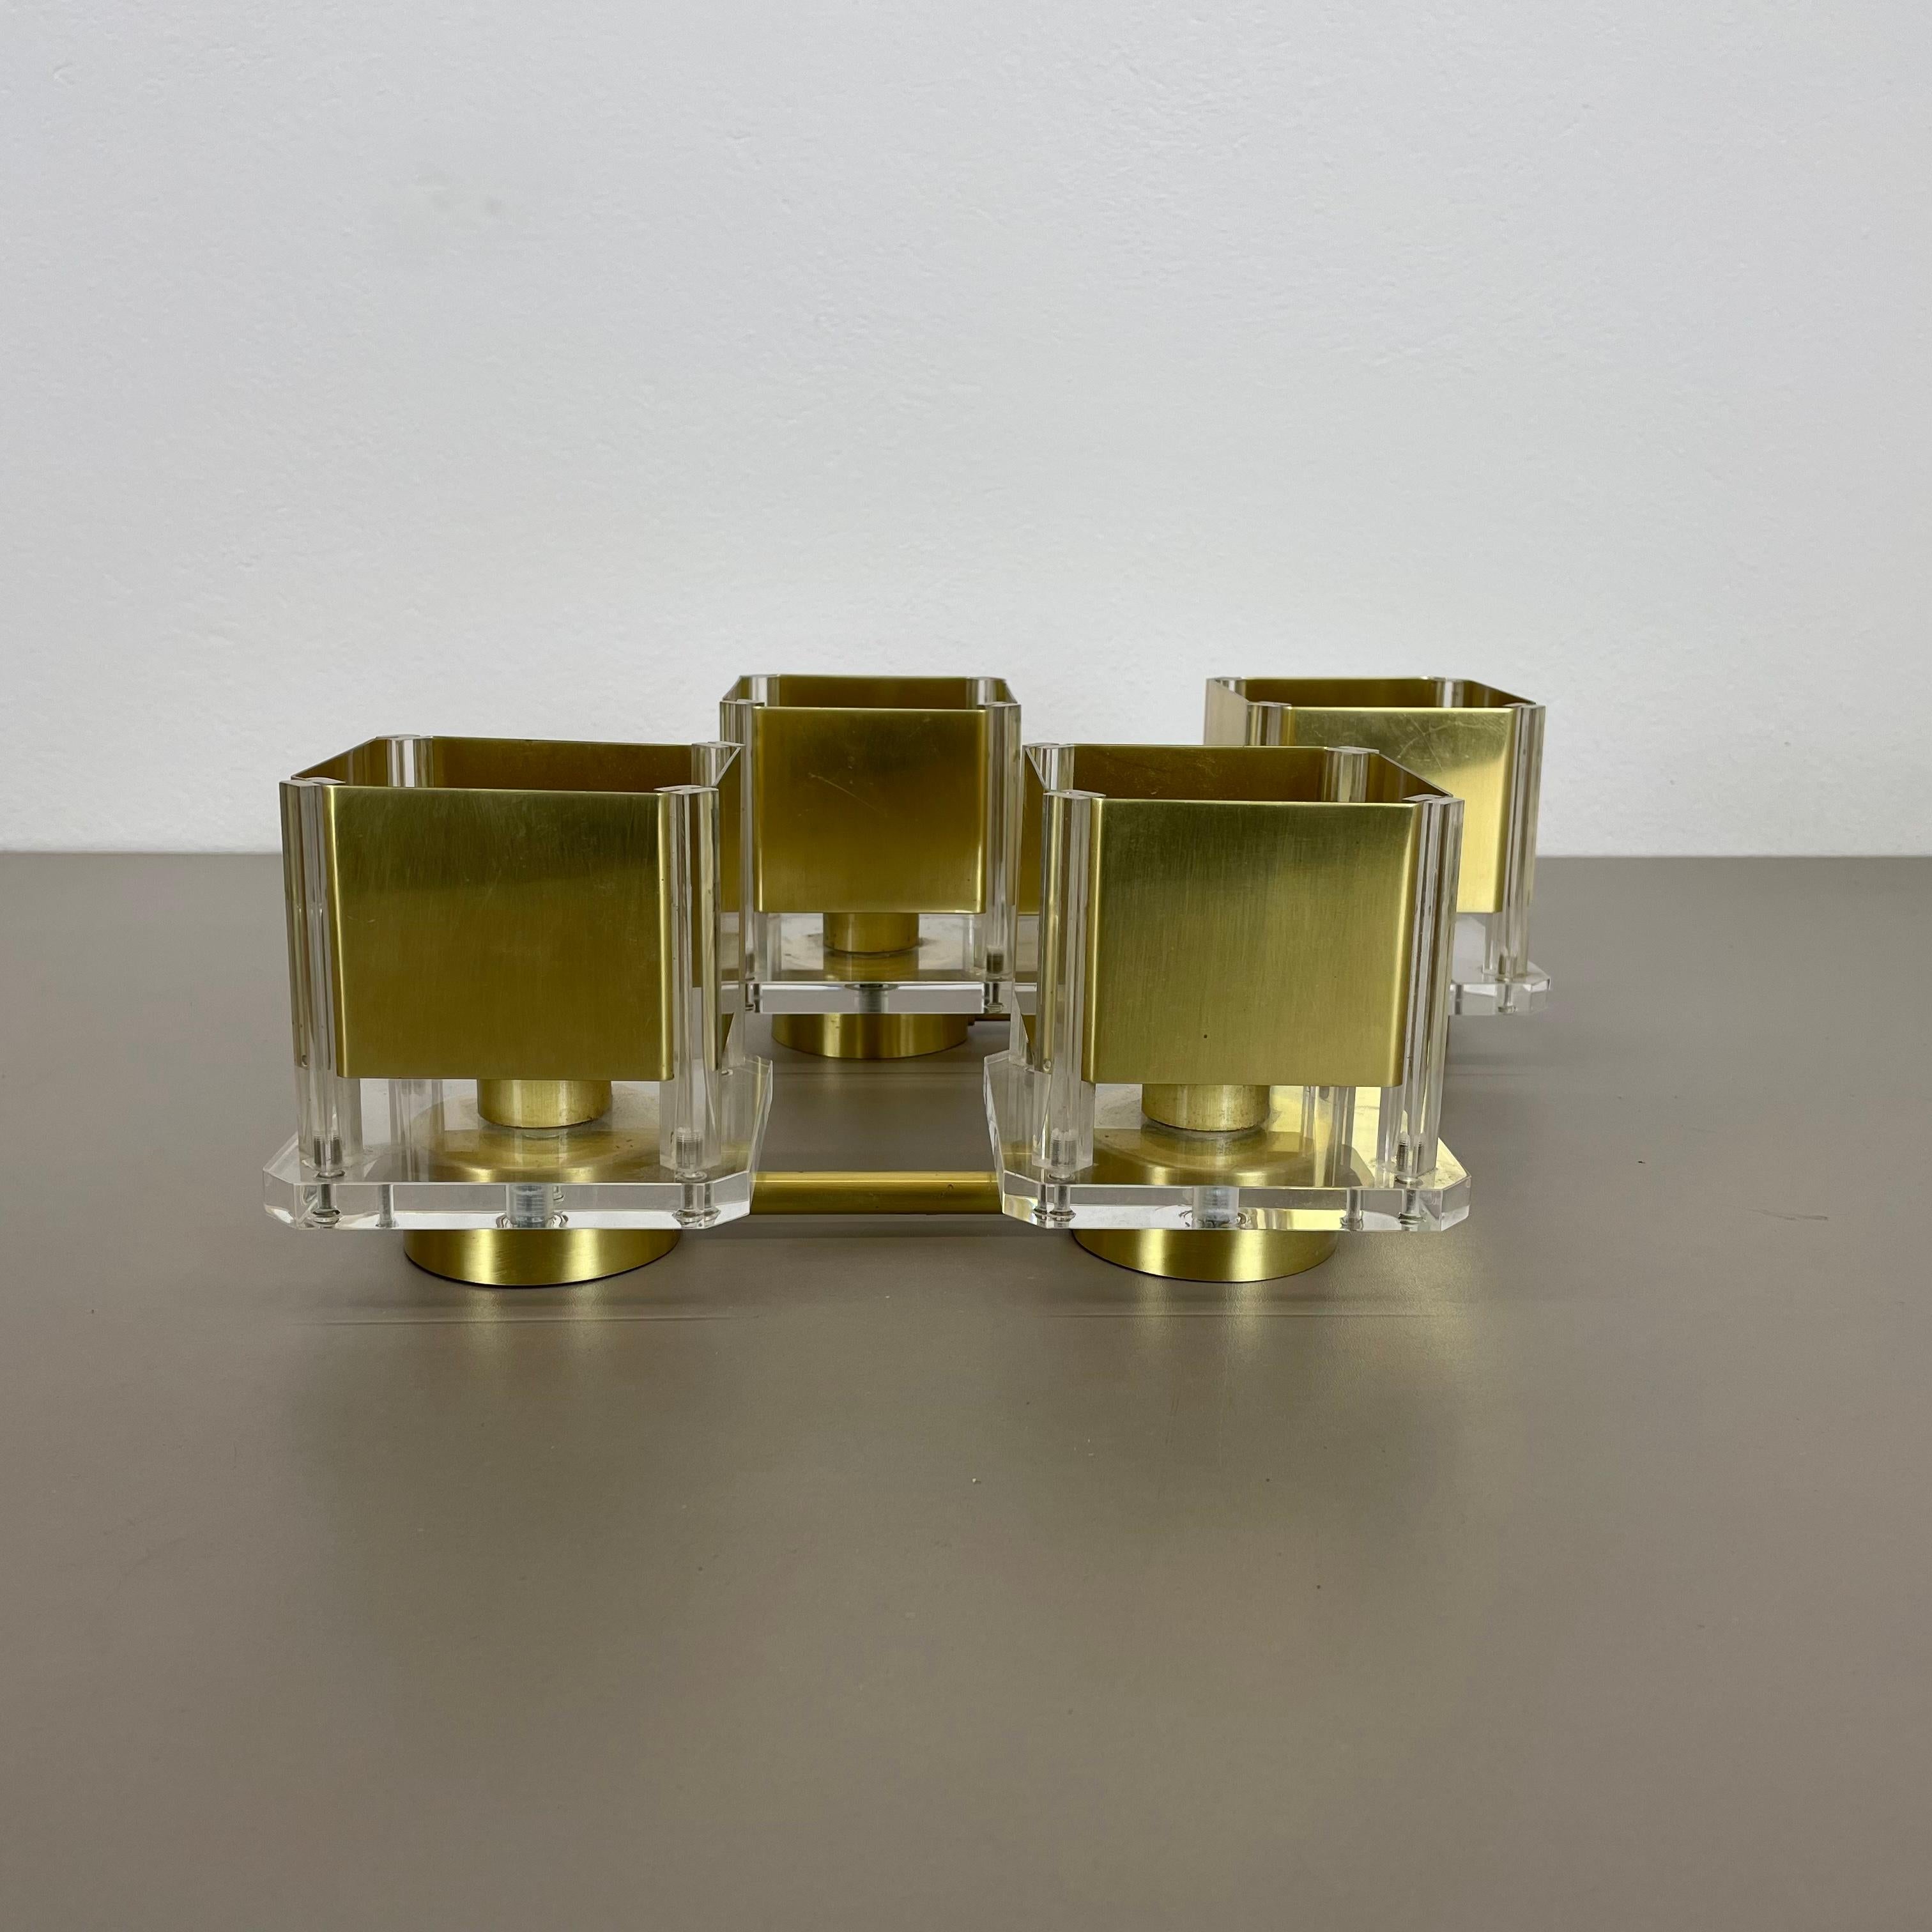 Set of 2 Brass + Acryl Glass Cubic Stilnovo Style Wall Light Sconces, Italy 1970 For Sale 1